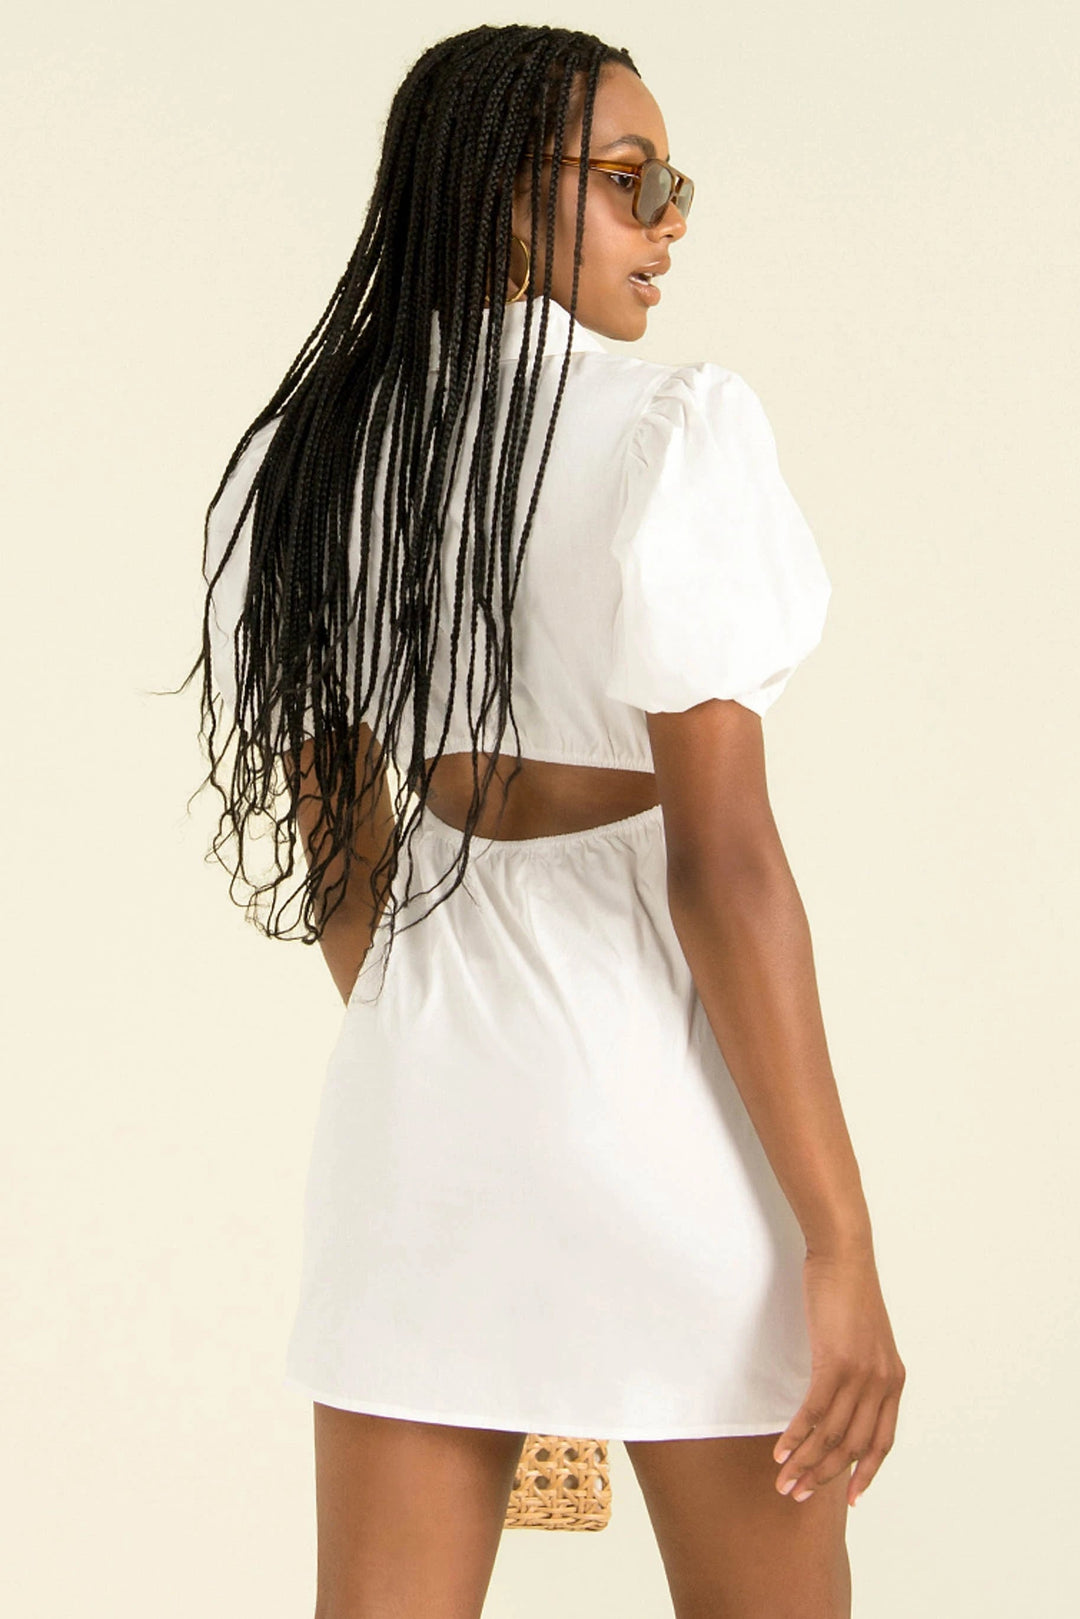 Picture-perfect Soft Airy Cotton Collared Short Sleeve White Shirt Dress 